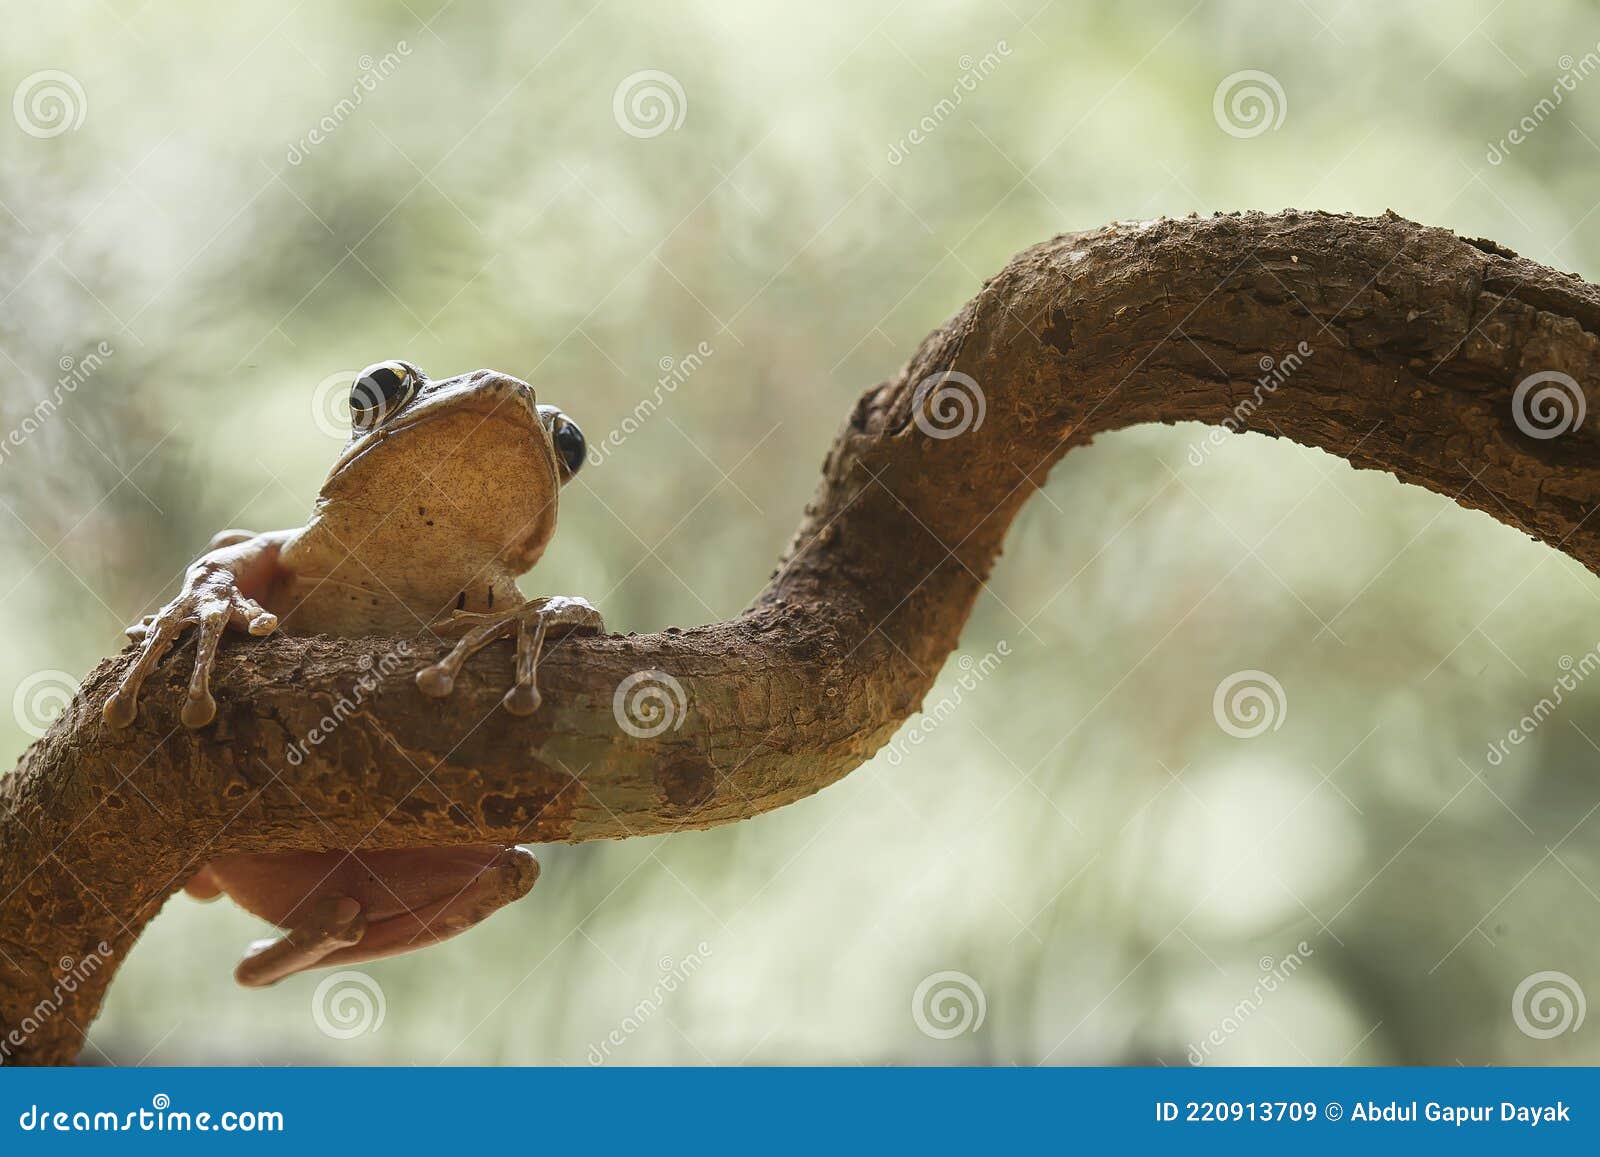 Frog or Toad in Amazing Pose Stock Image - Image of color, real: 220913709